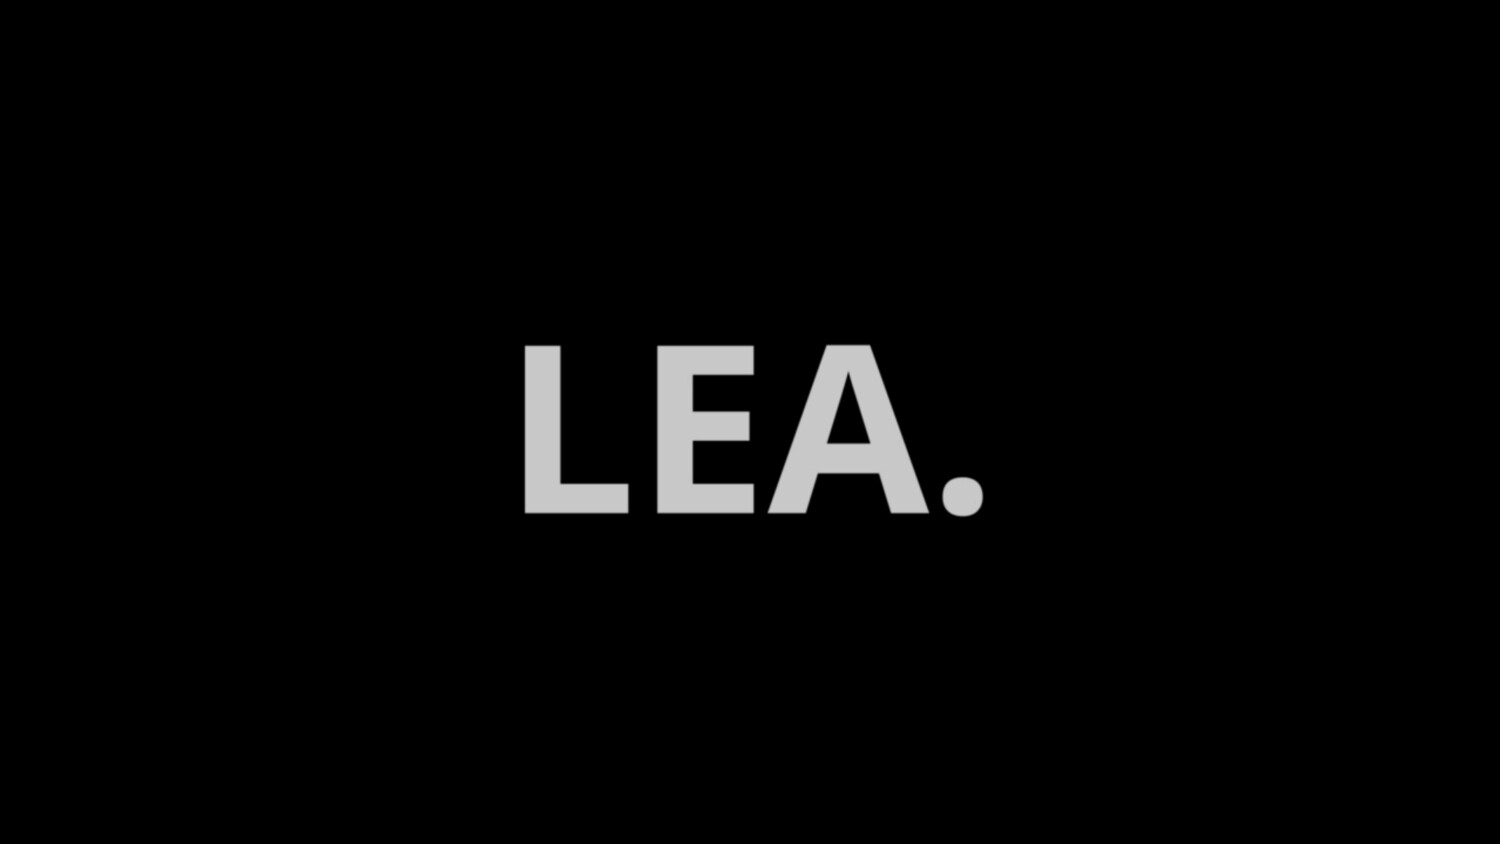 Lea - Download for personal use